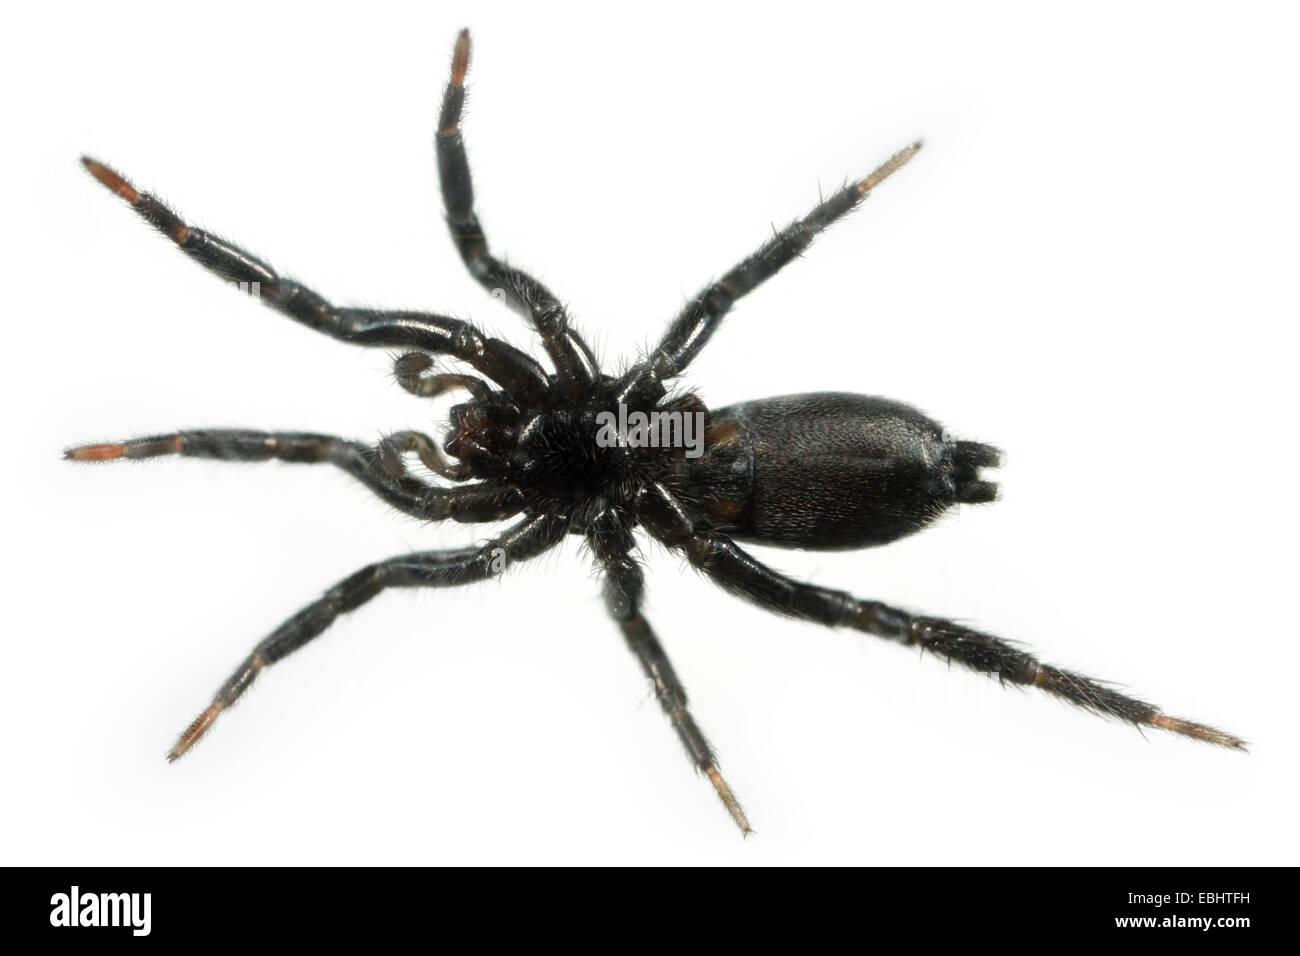 A female (Zelotes latreillei) spider on white background. The spider is part of the family Gnaphosidae, Ground spiders. Stock Photo